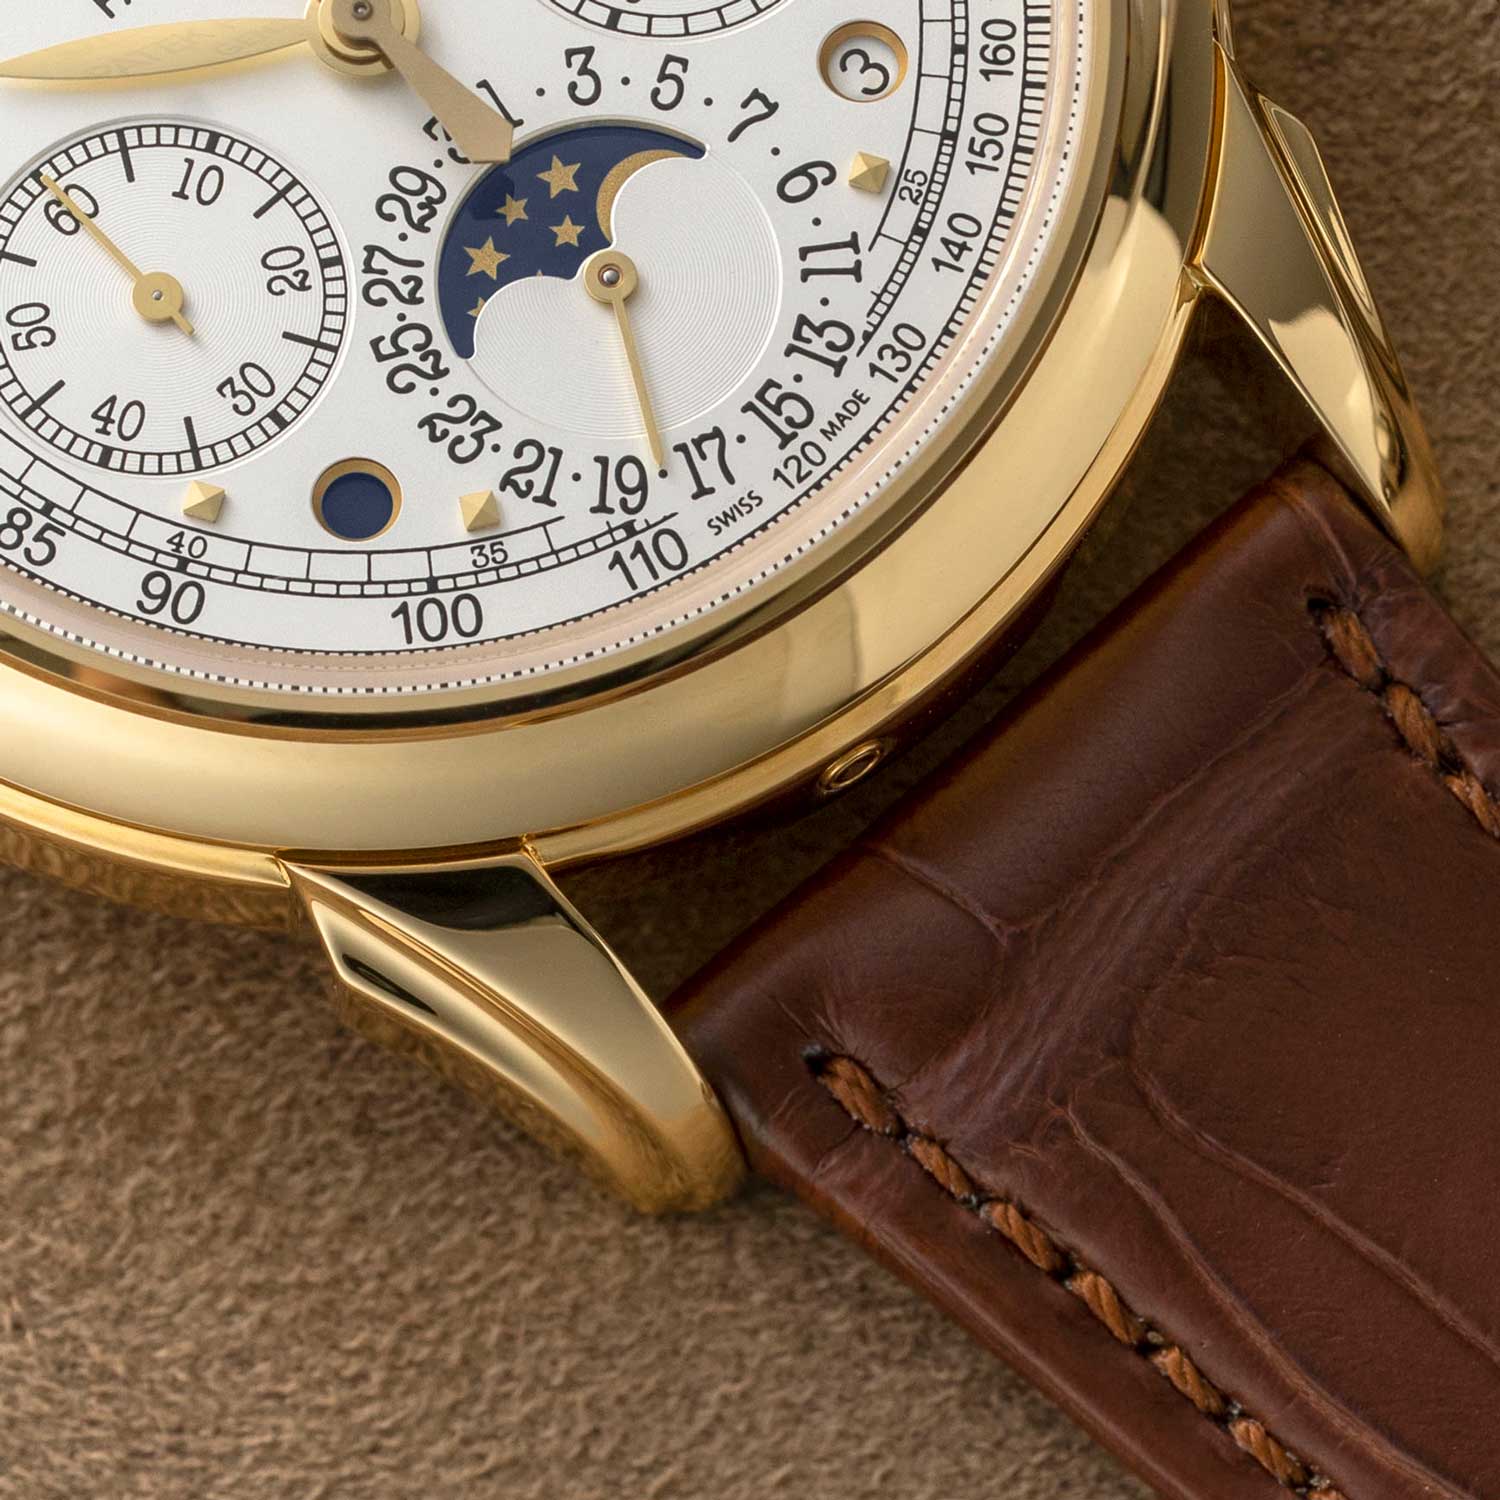 The resultant design on the 5270's lugs is the single most dynamically stylized lugs of any Patek chronograph since the famous spider-lug chronograph, reference 1579 (©Revolution)